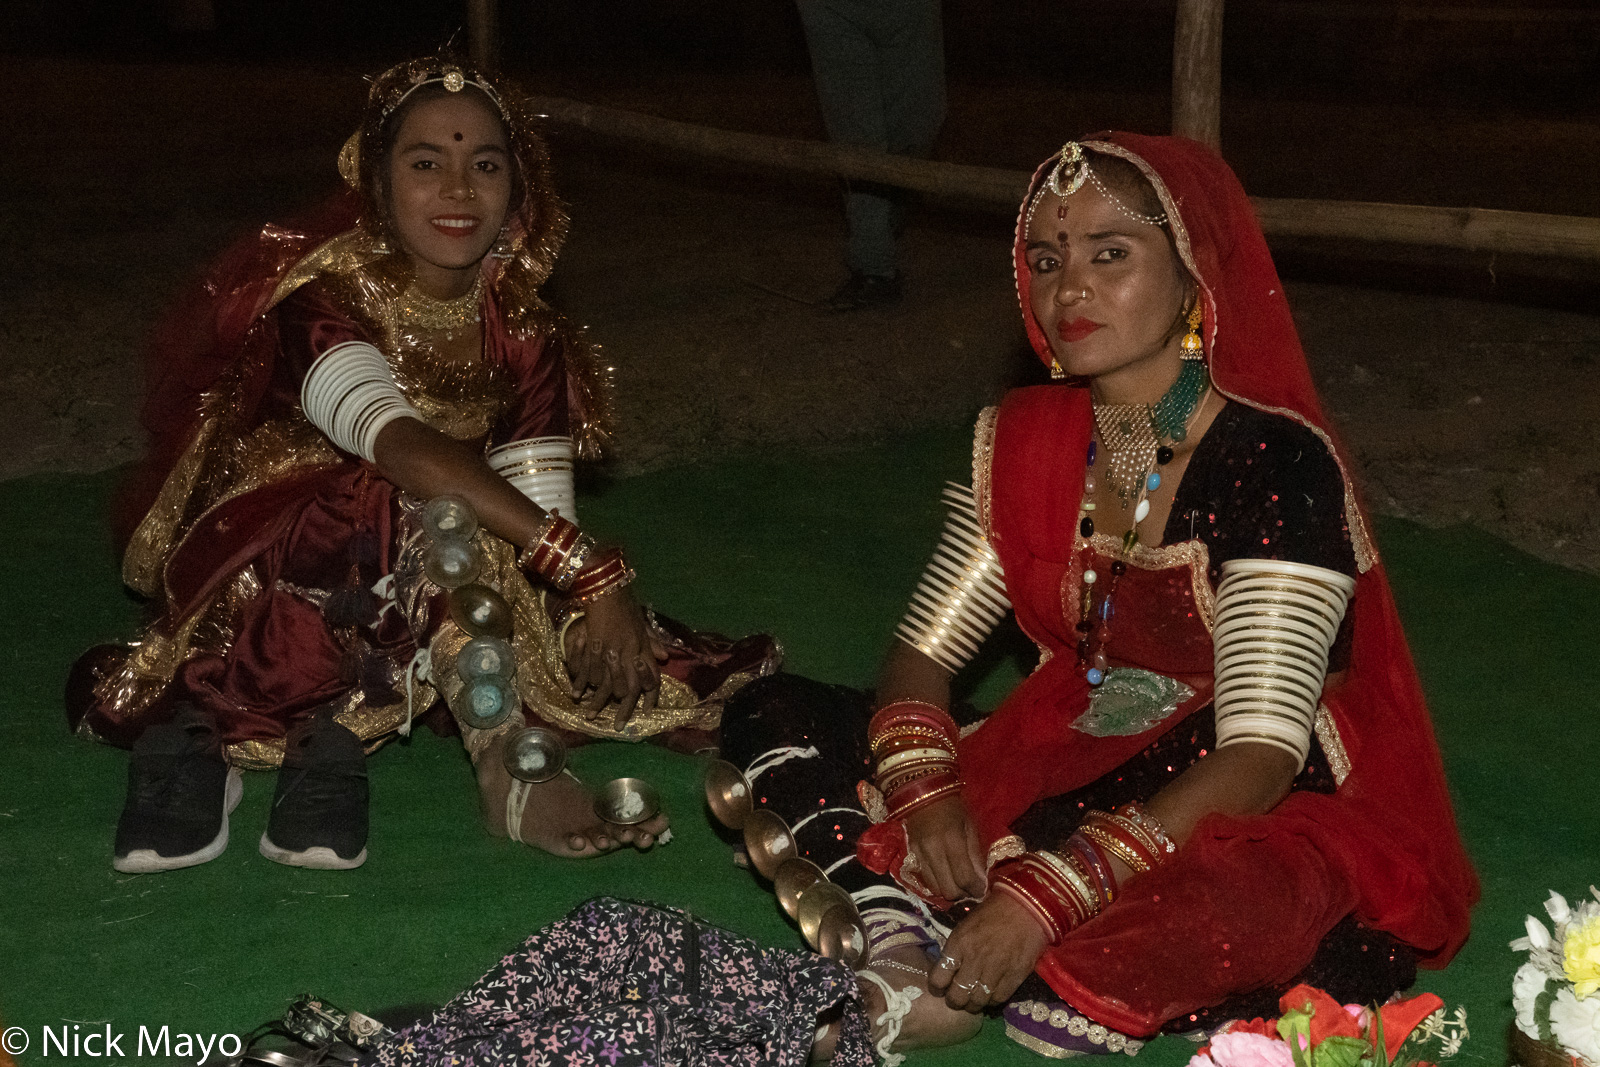 Two dancers waiting to take the stage during the evening performances of the Bundi Festival.